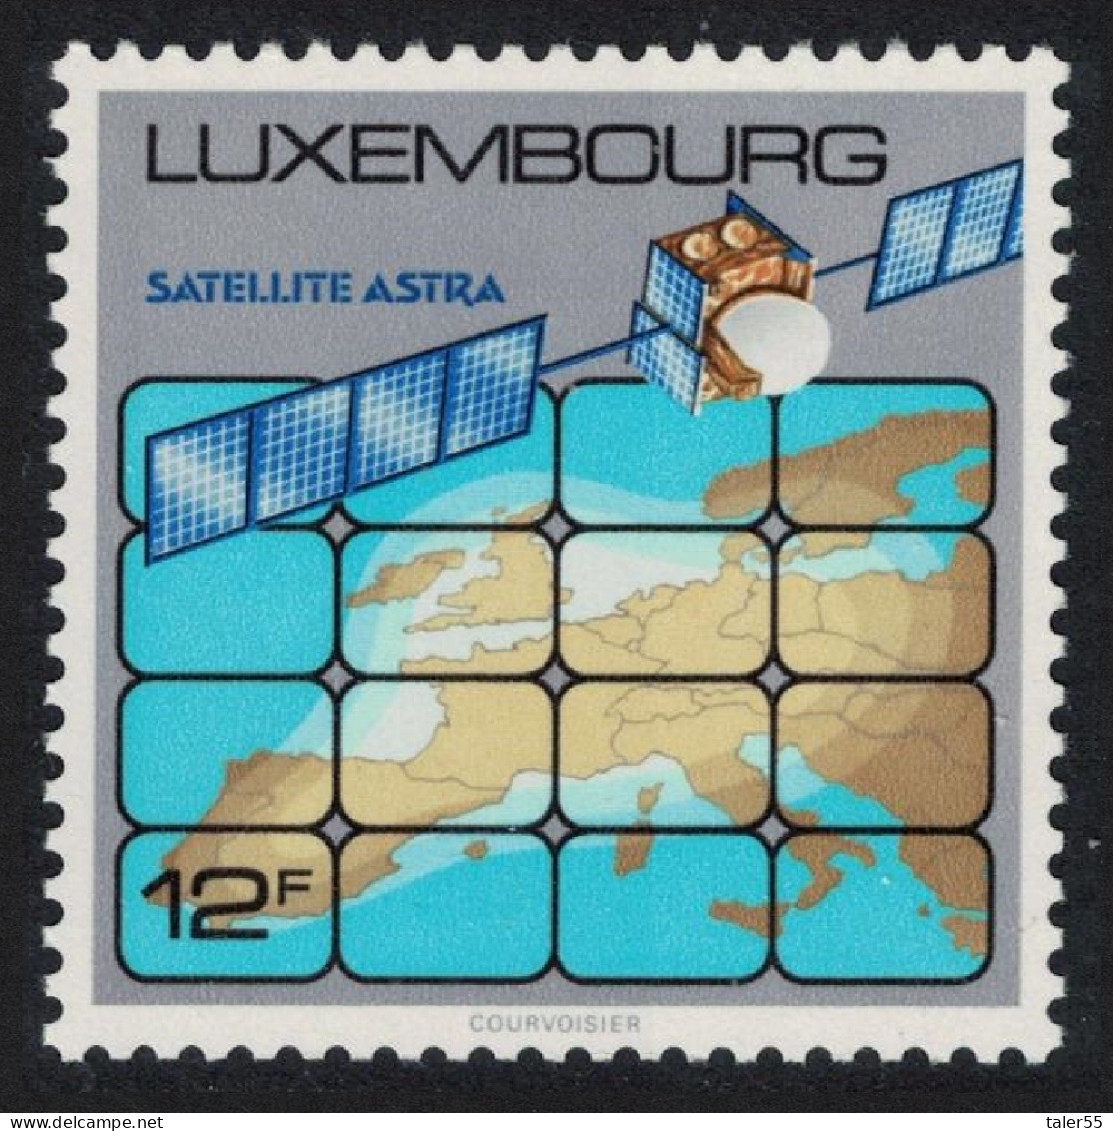 Luxembourg Launch Of 16-channel TV Satellite 1989 MNH SG#1245 MI#1218 - Nuevos